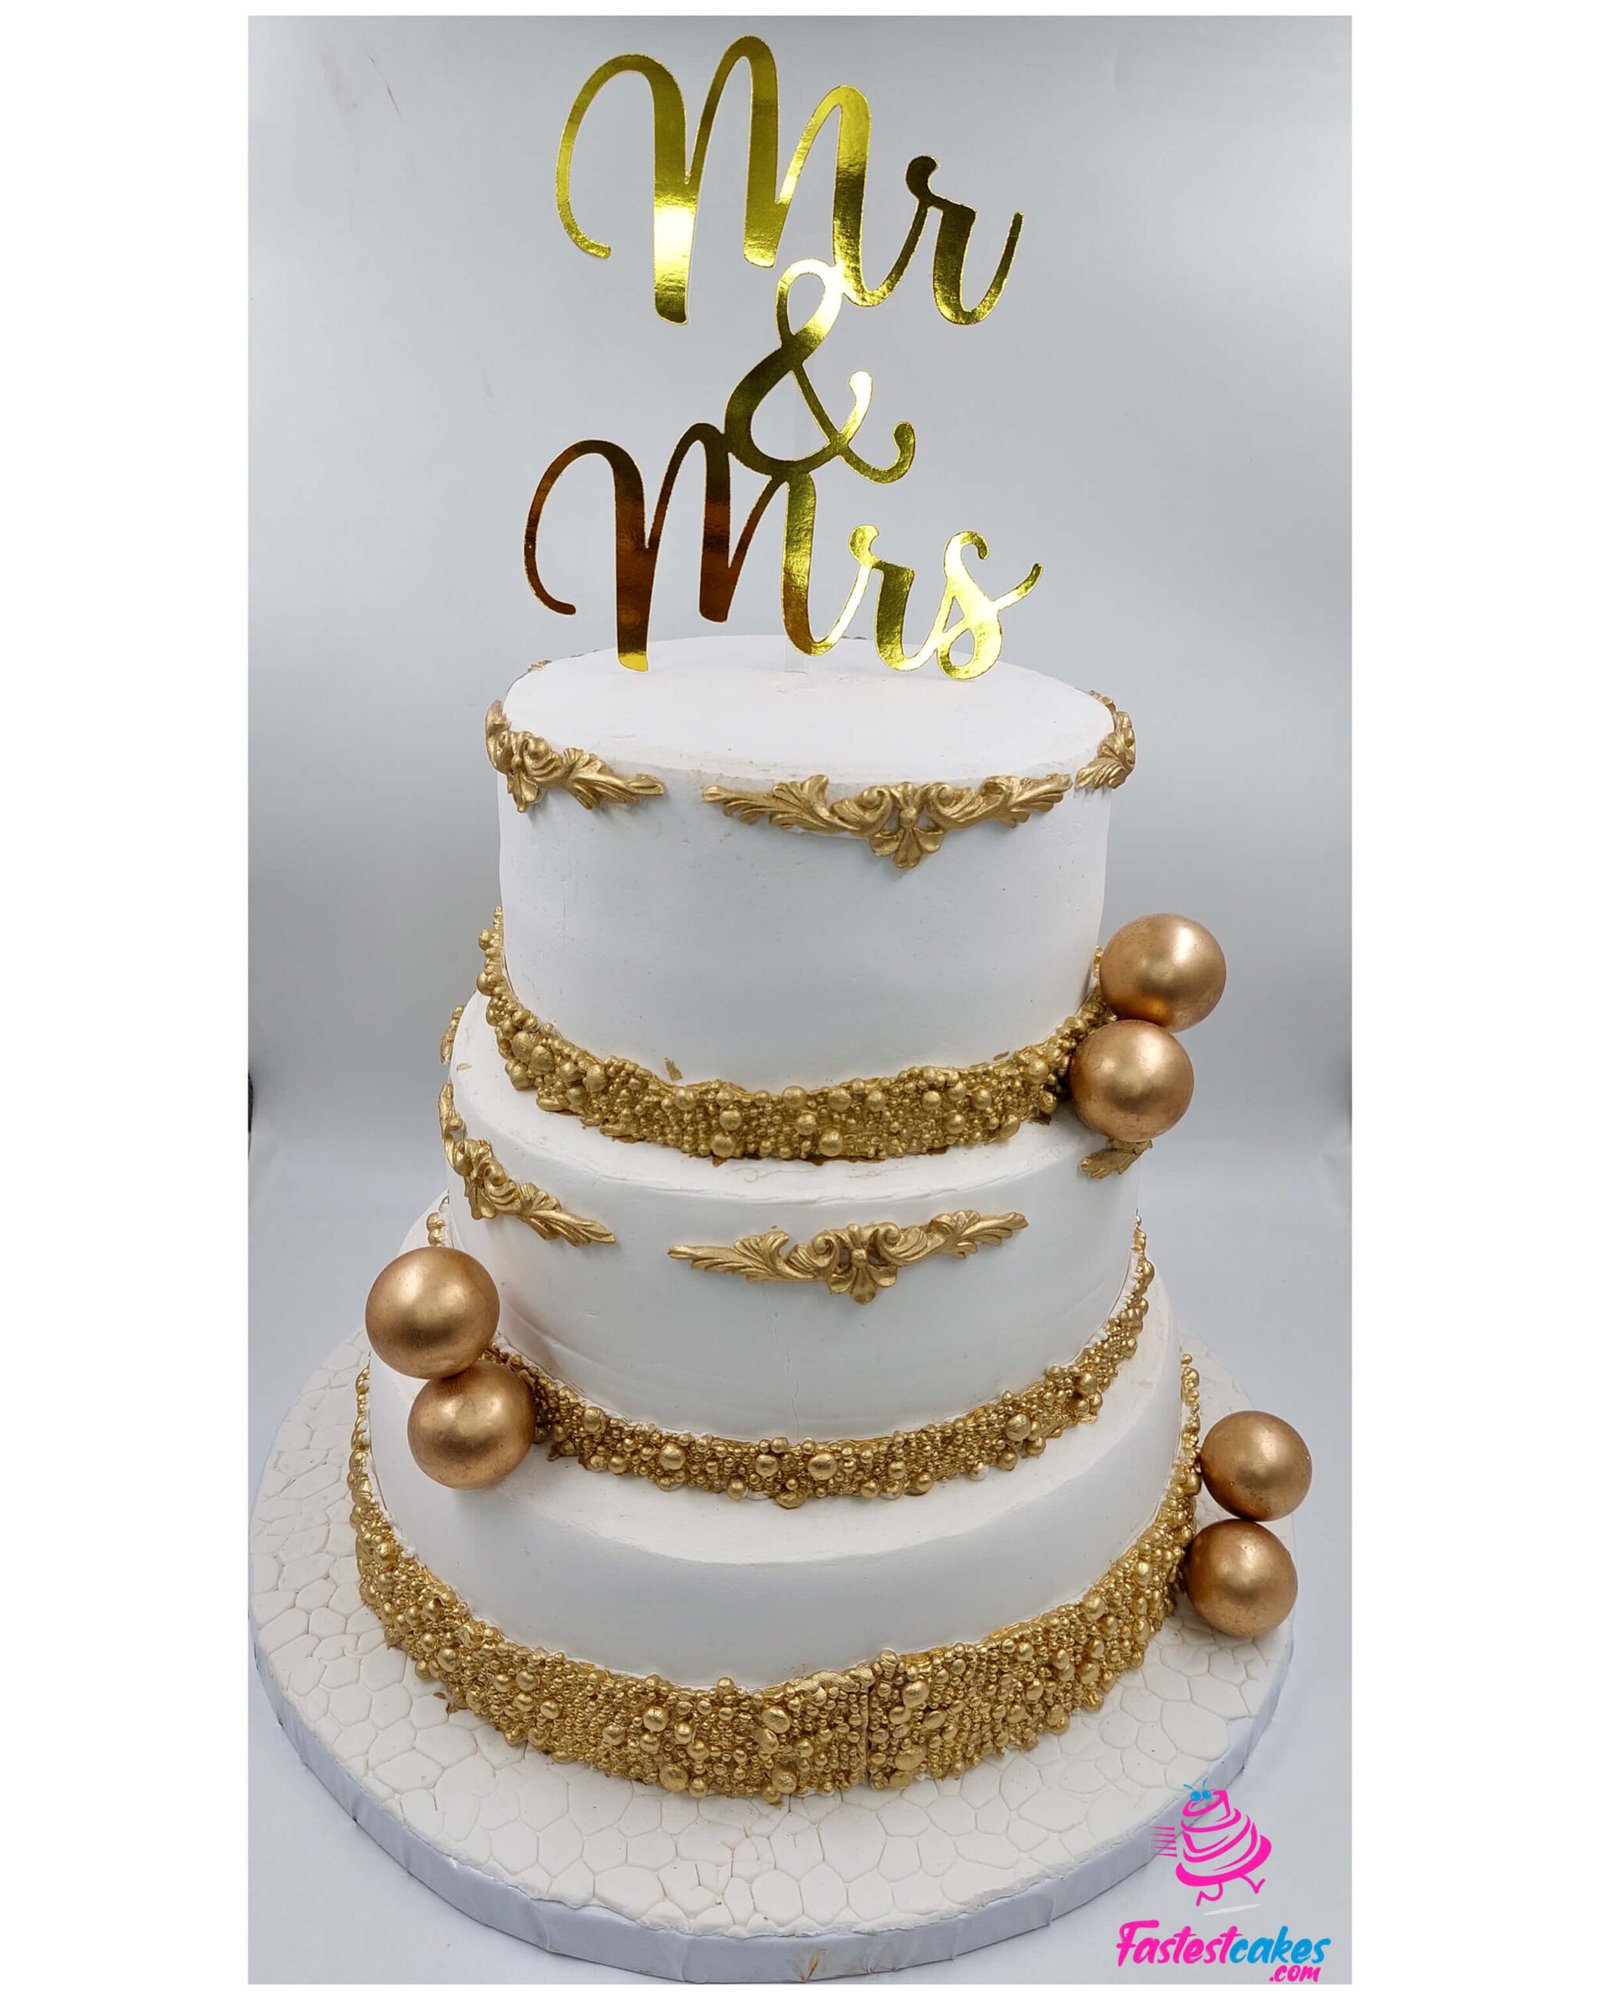 4,528 3 Tier Cake Images, Stock Photos, 3D objects, & Vectors | Shutterstock